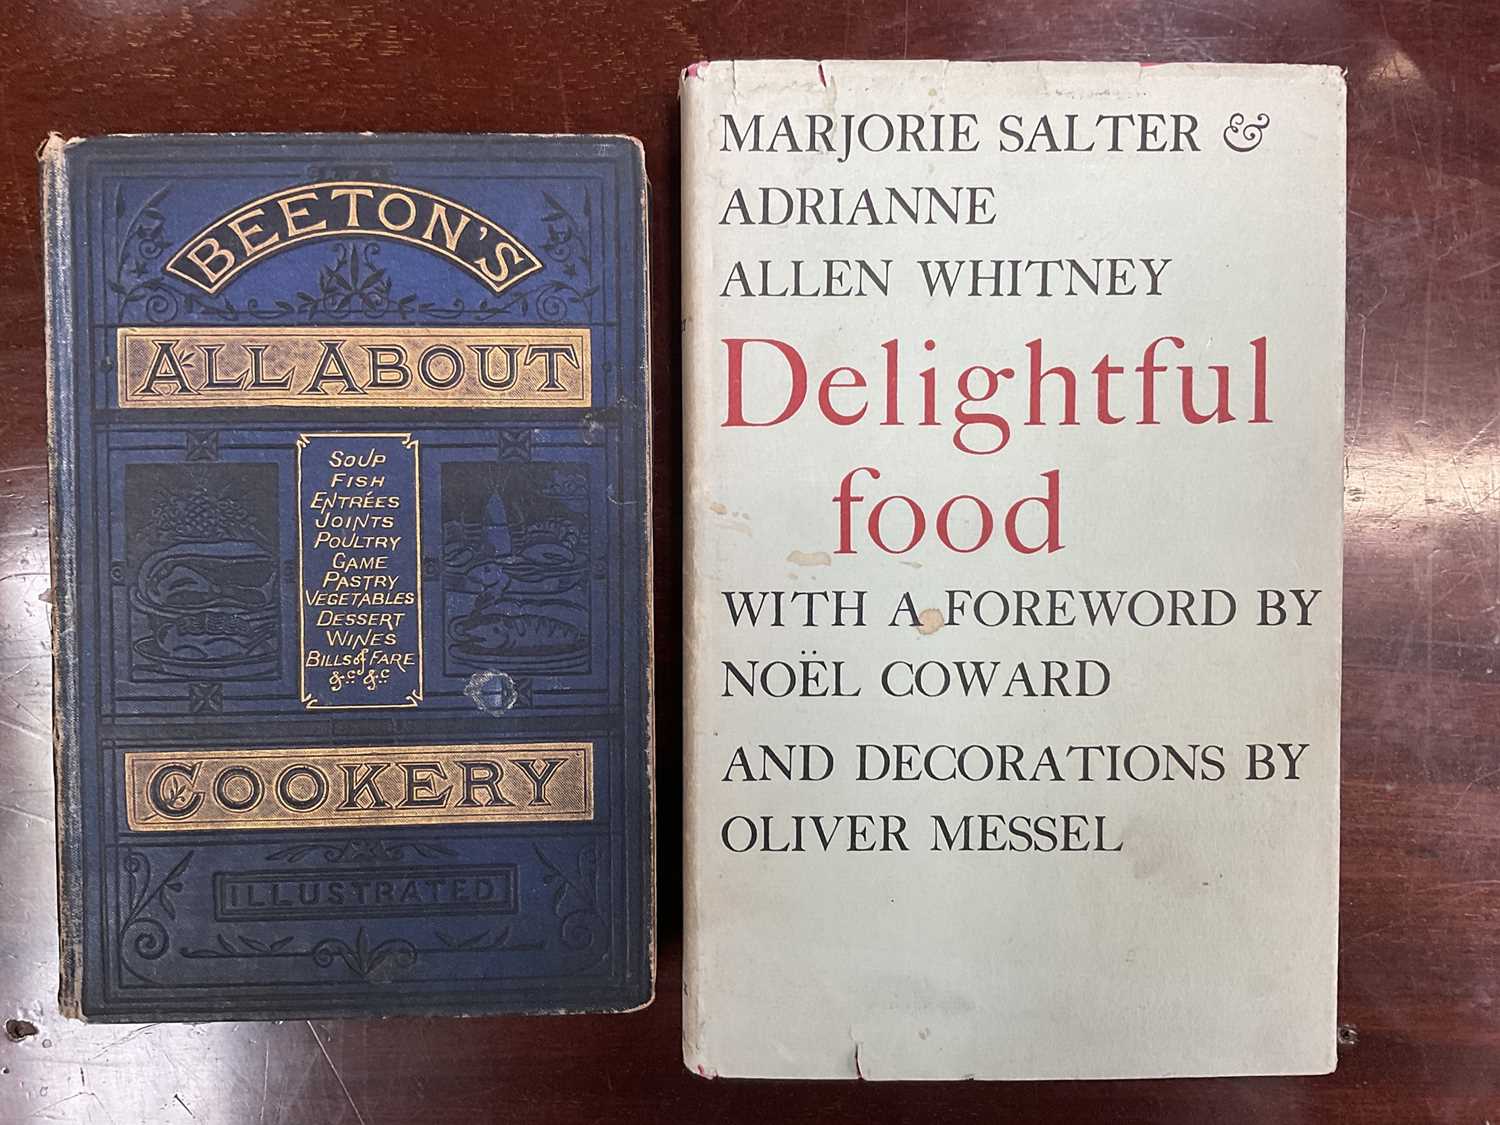 Marjorie Salter and Adrianne Whitney - Delightful Food, forward by Noel Coward, decorations by Olive